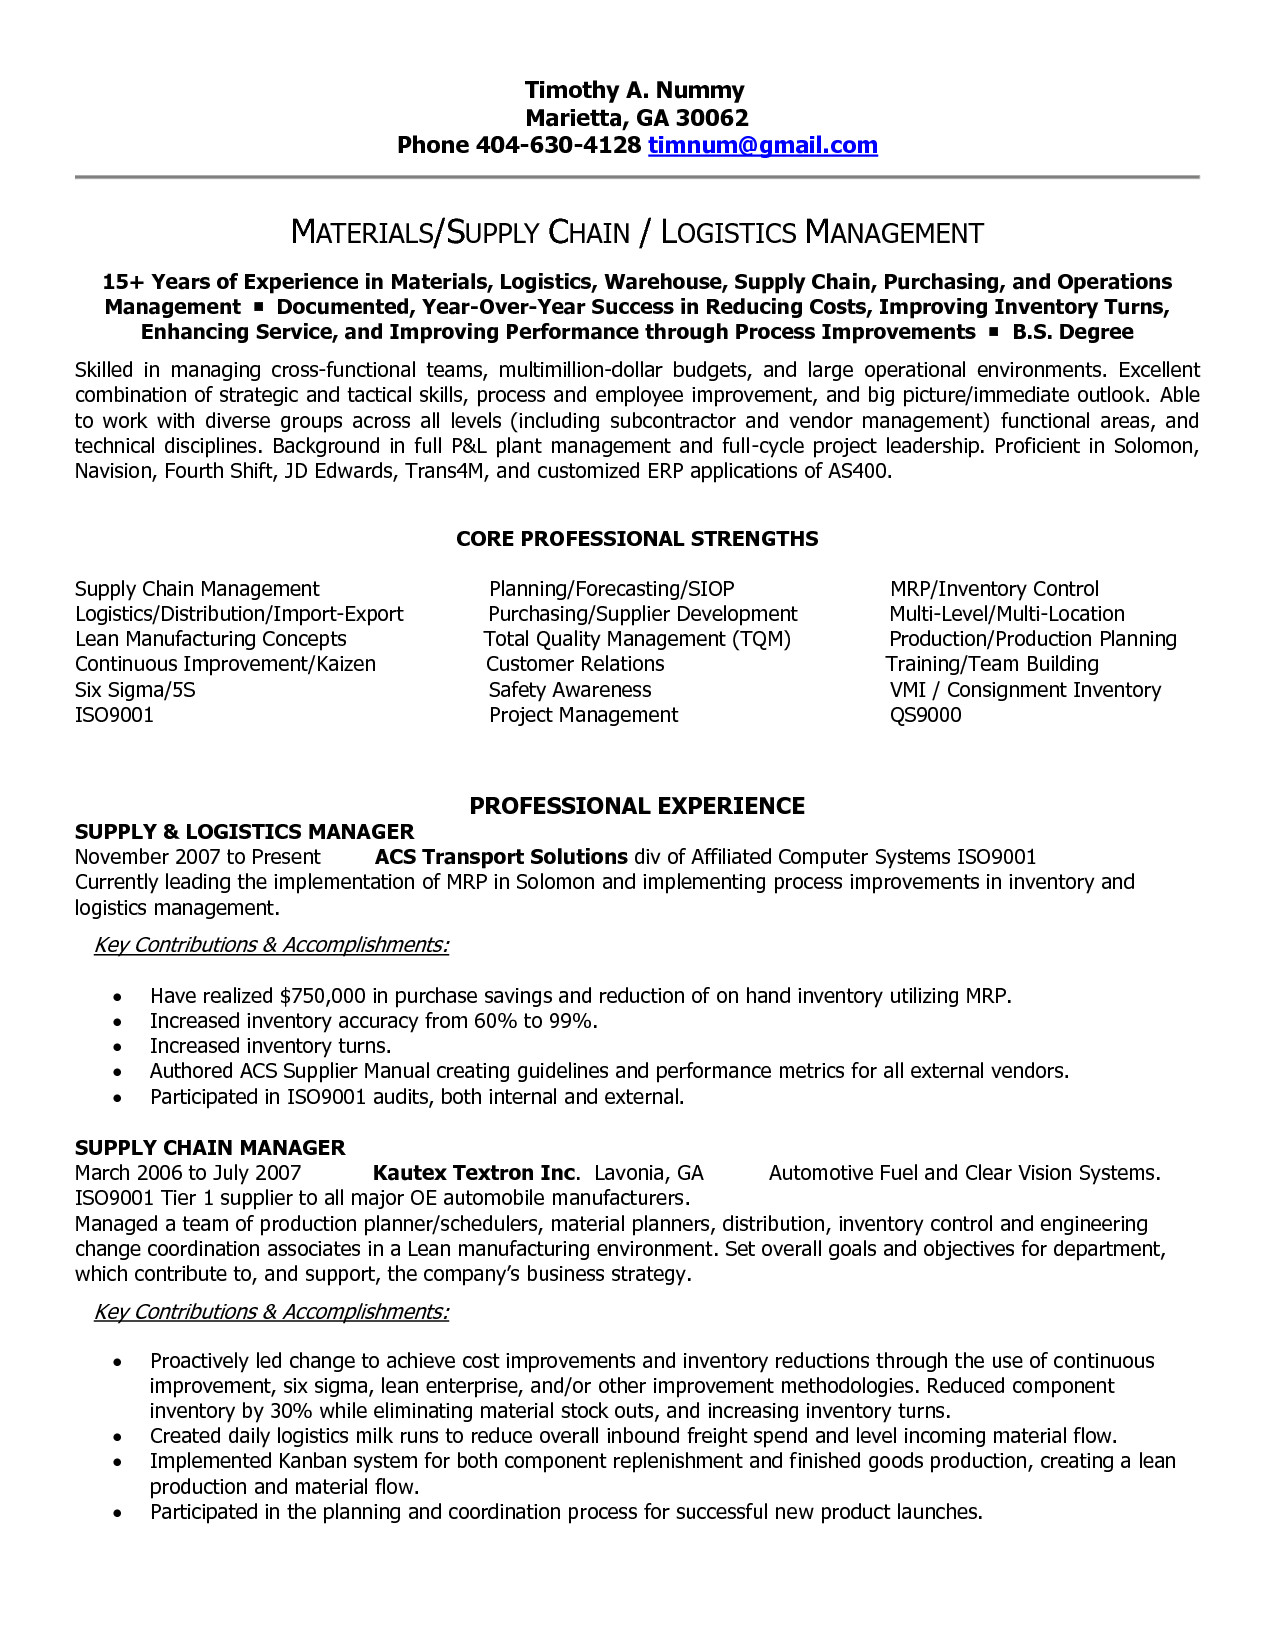 Sample Resume for Logistics and Supply Chain Management Pdf Supply Chain Resume Templates